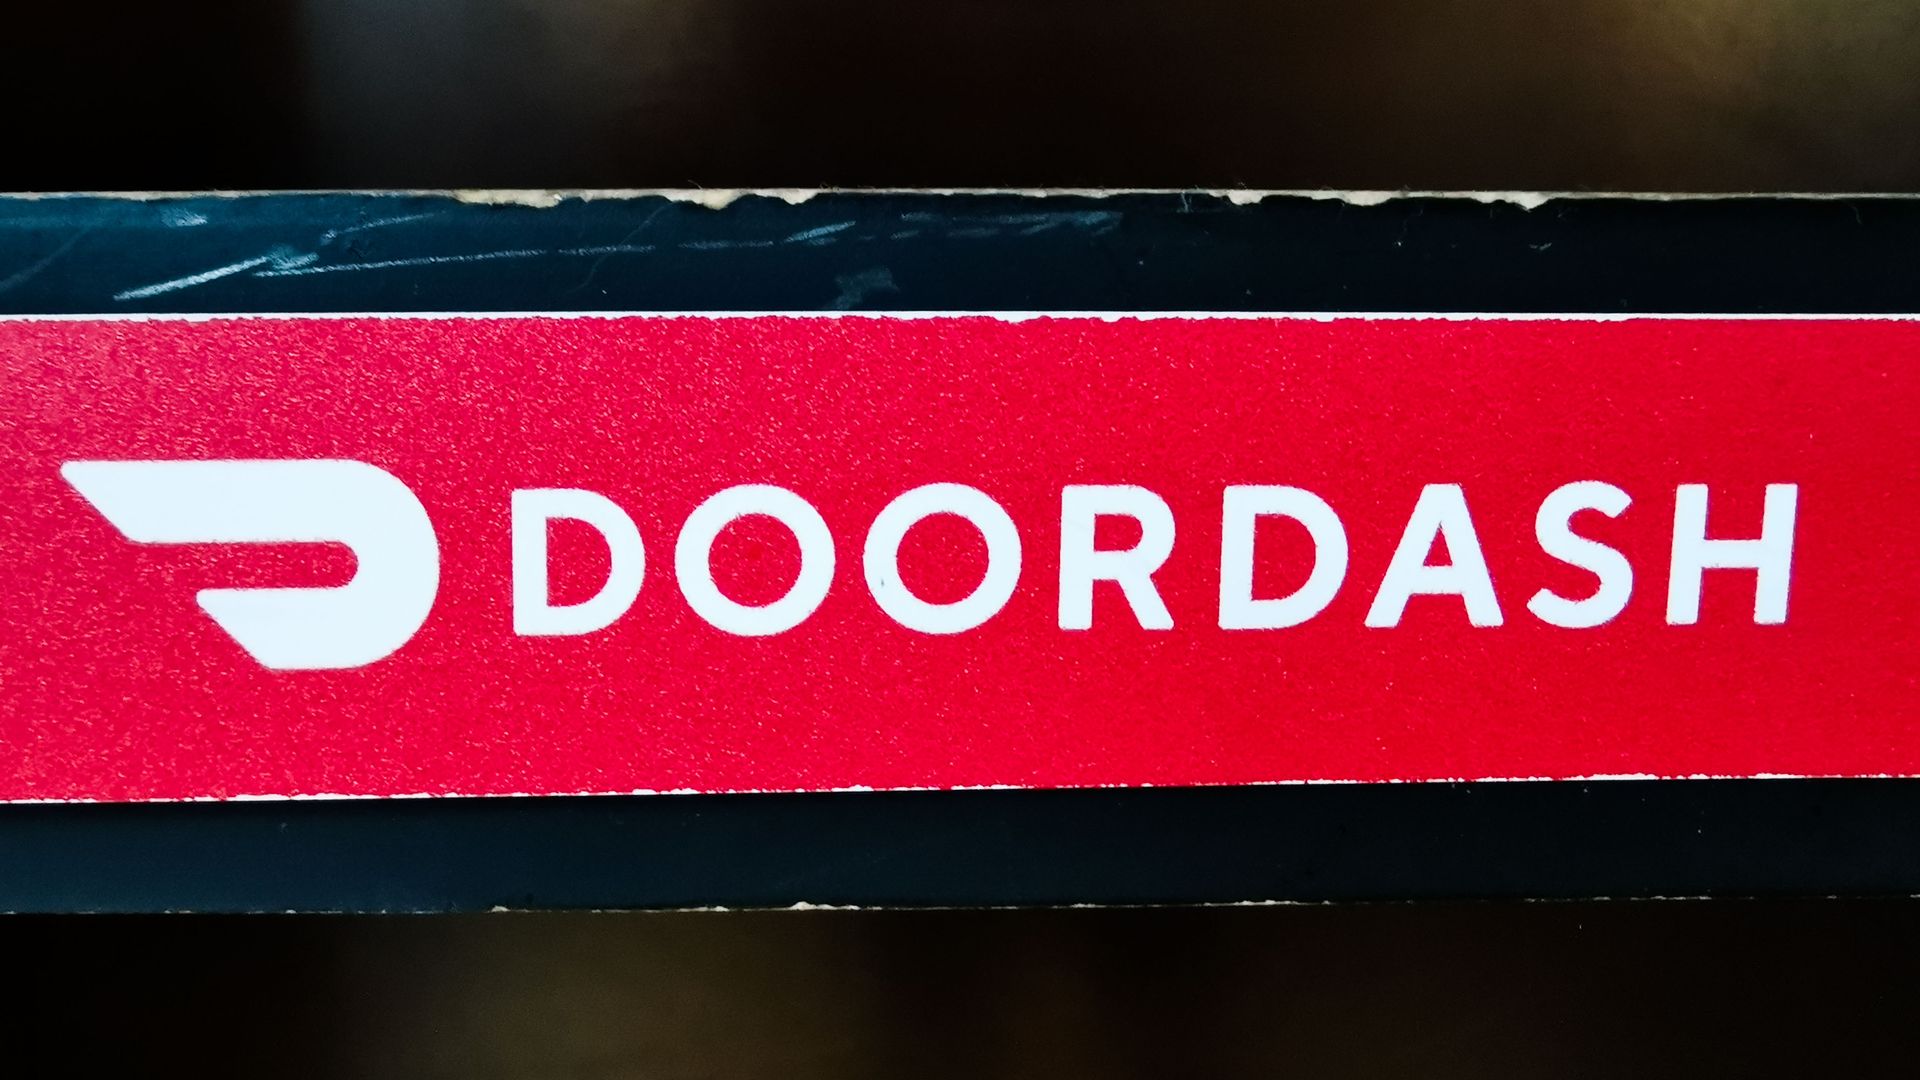 Doordash logo sign is seen in a restaurant in Chicago, United States, on October 17, 2022.